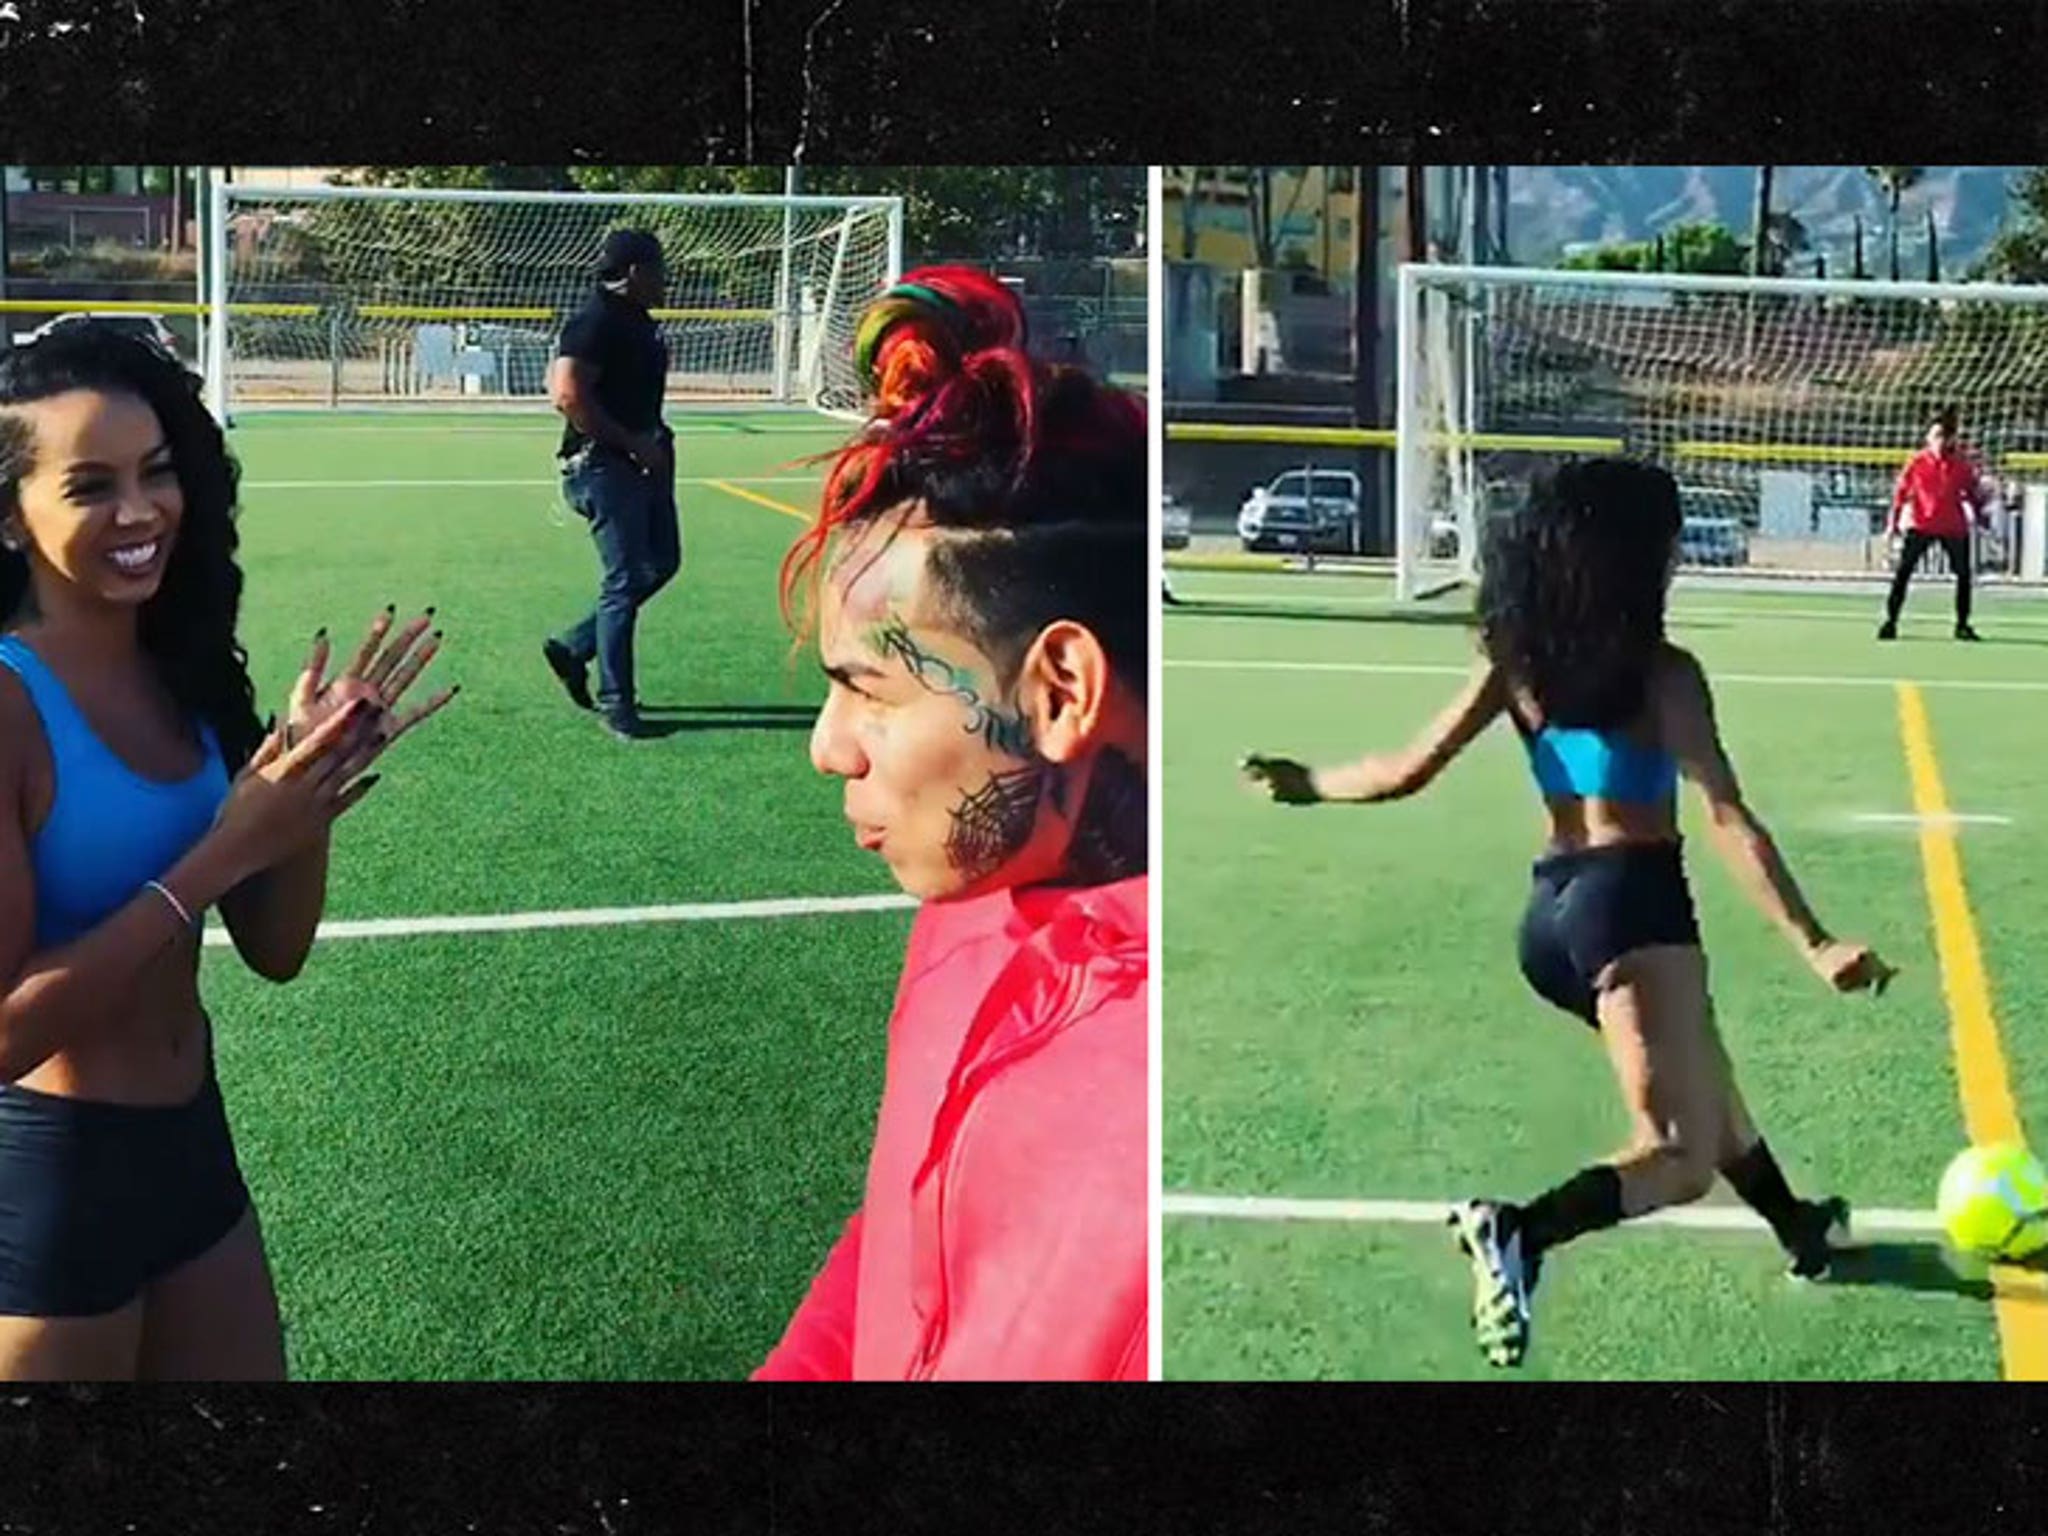 Tekashi69 Wrecked By Model Brittany Renner in Soccer Shootout